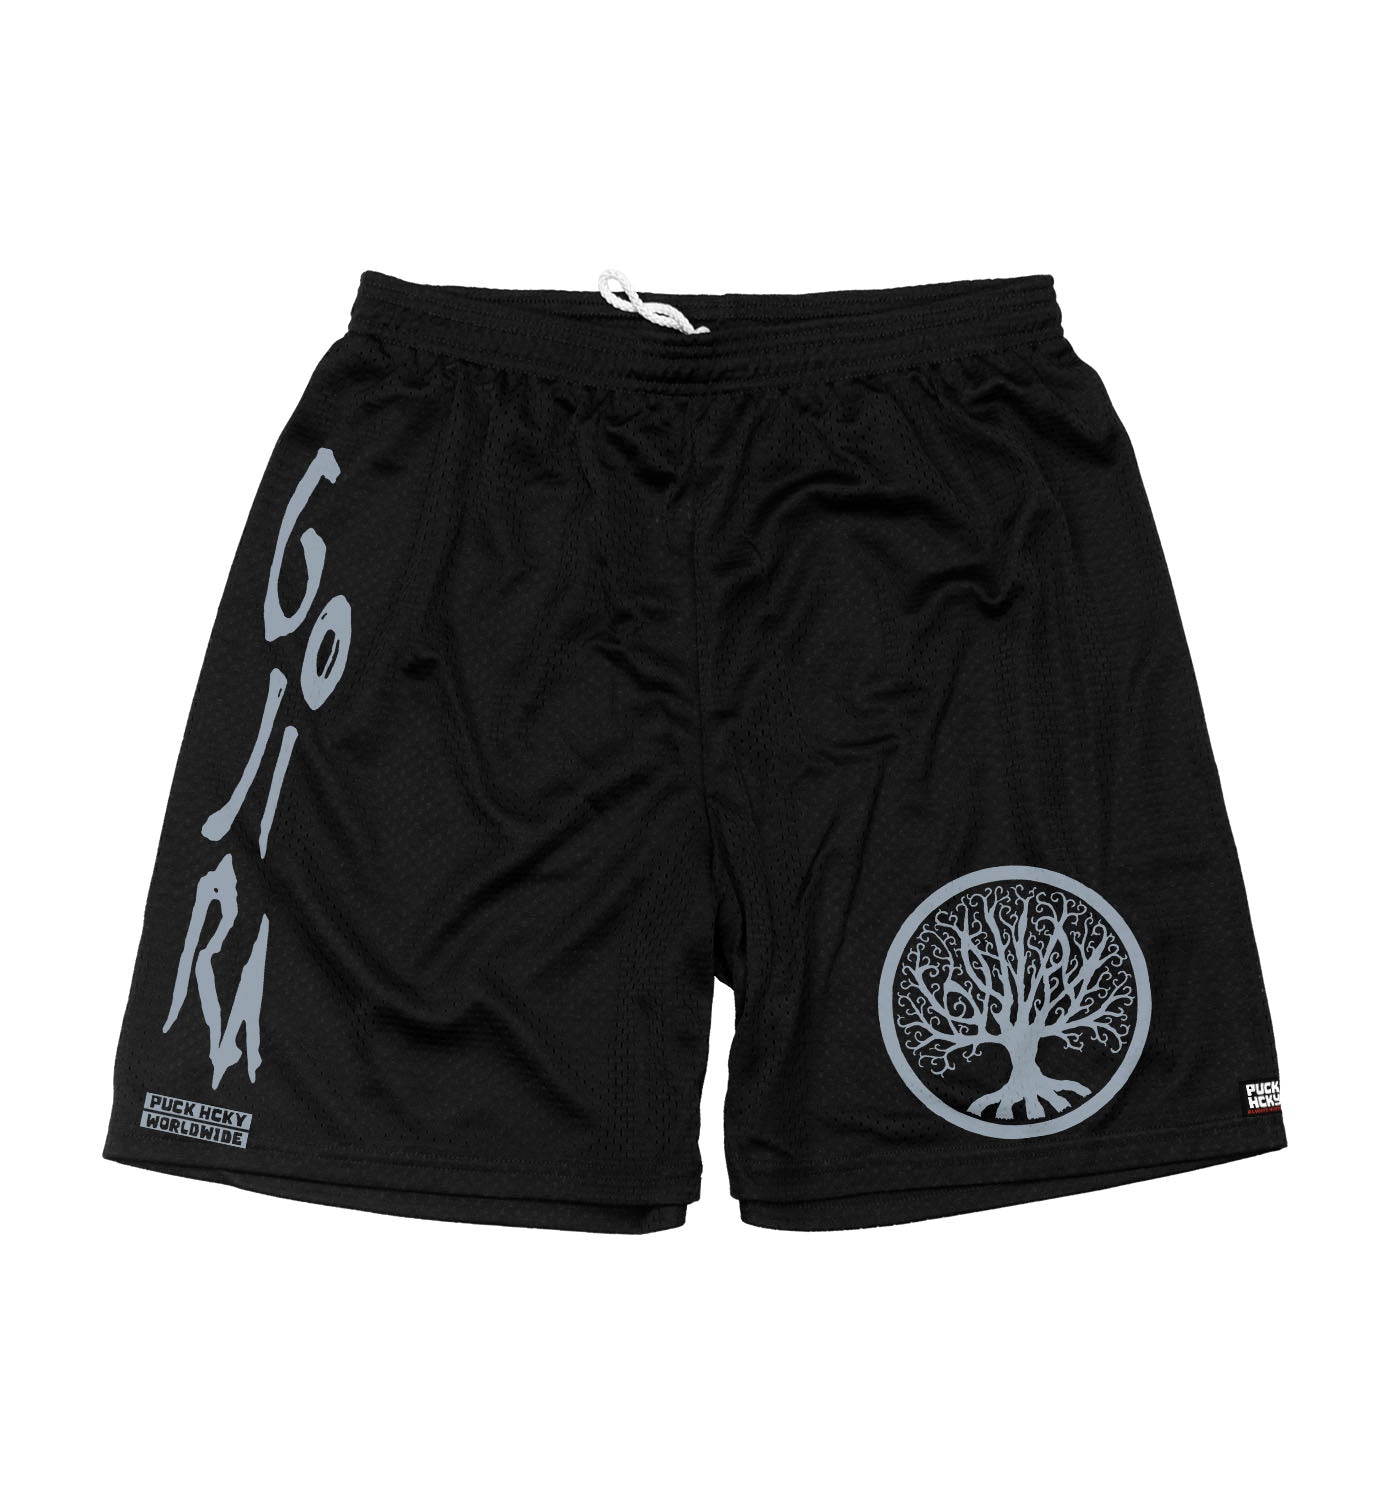 GOJIRA 'FROM THE TREES' mesh hockey shorts in black front view